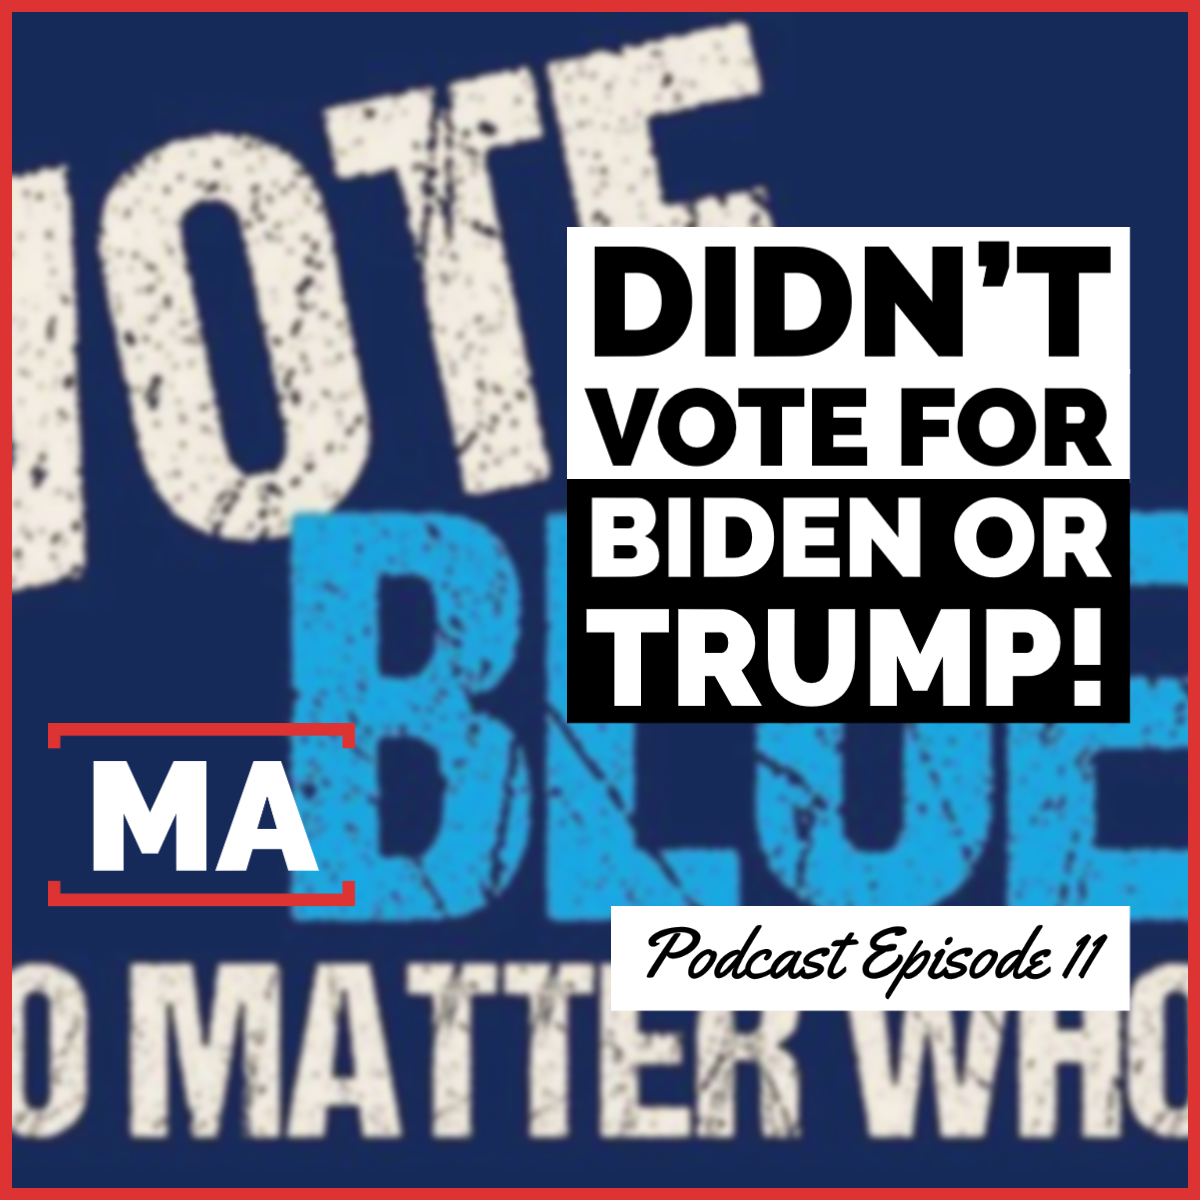 MASS ACTION Podcast Episode 11: We Didn't Vote for Biden or Trump with Dr. Jared Ball